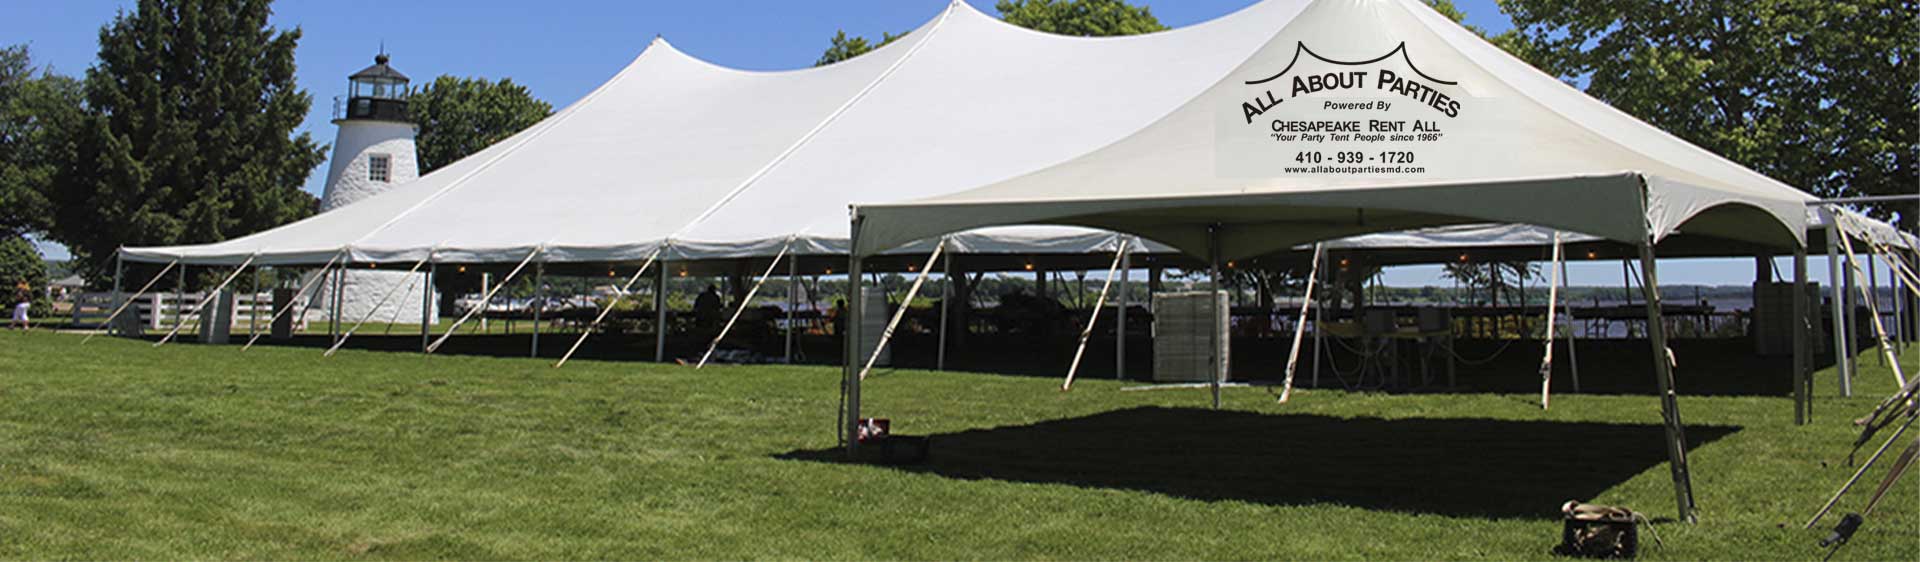 Tent Rentals Near Me Harford County